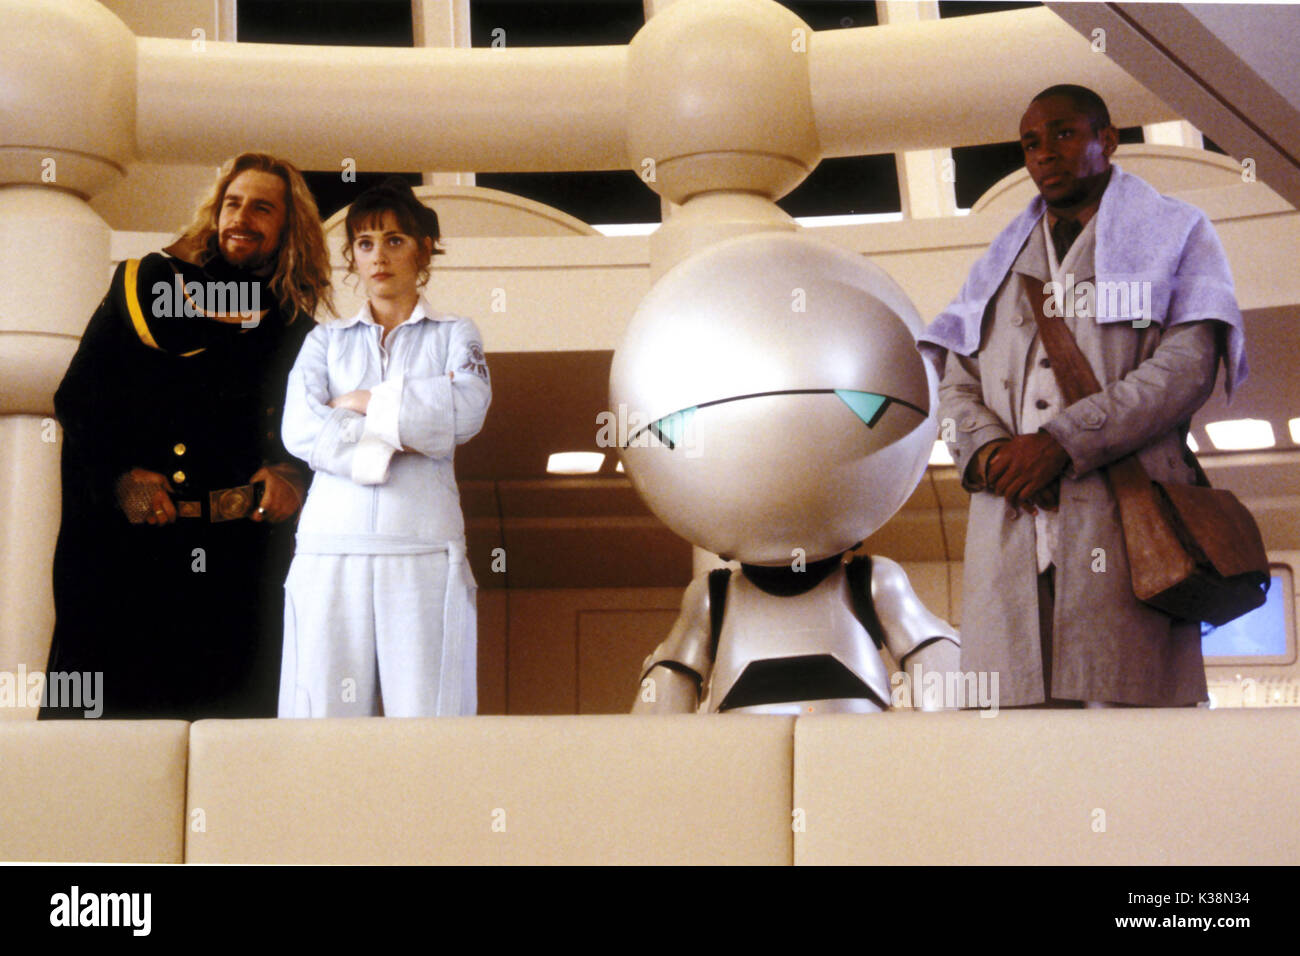 THE HITCHHIKER'S GUIDE TO THE GALAXY [US / BR 2005]  SAM ROCKWELL, as Zaphod Beeblebrox,  ZOOEY DESCHANEL, as Trillian,  [robot] Marvin, voiced by ALAN RICKMAN,  MOS DEF, as Ford Prefect     Date: 2005 Stock Photo